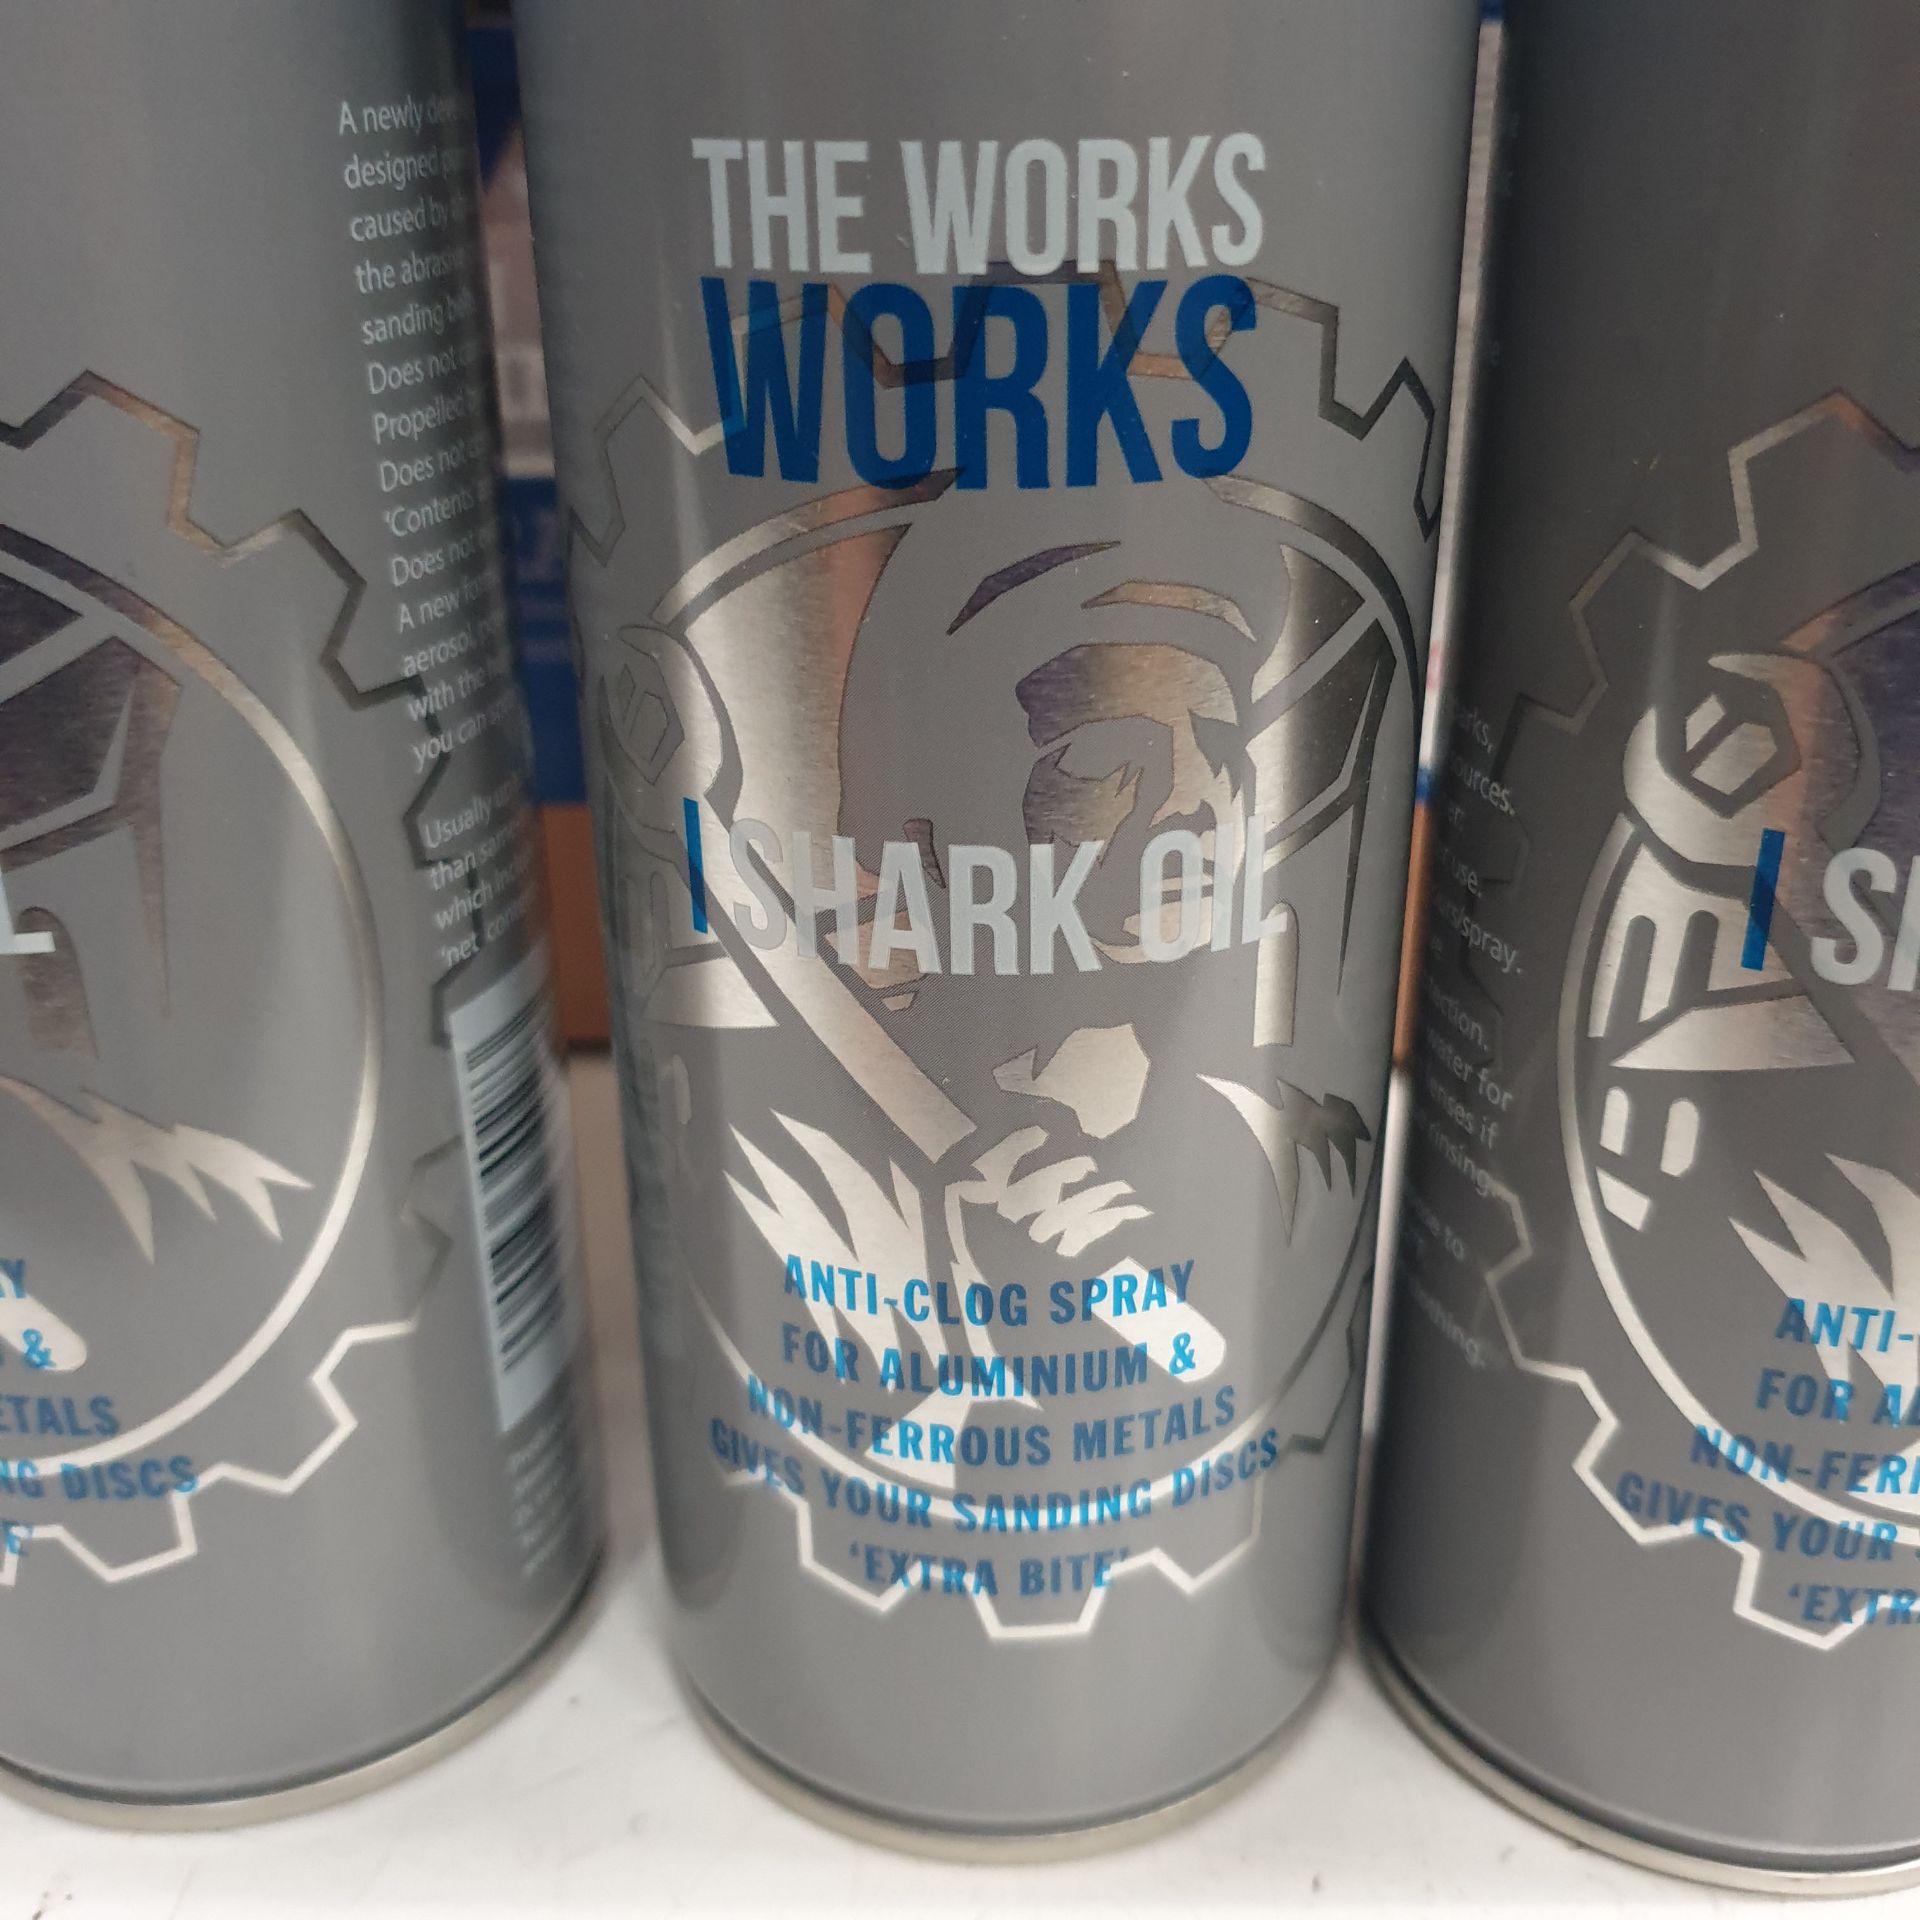 8 x Cans of The Works Works Shark Oil. Anti-Clog Spray for Aluminium Sanding. - Image 2 of 2